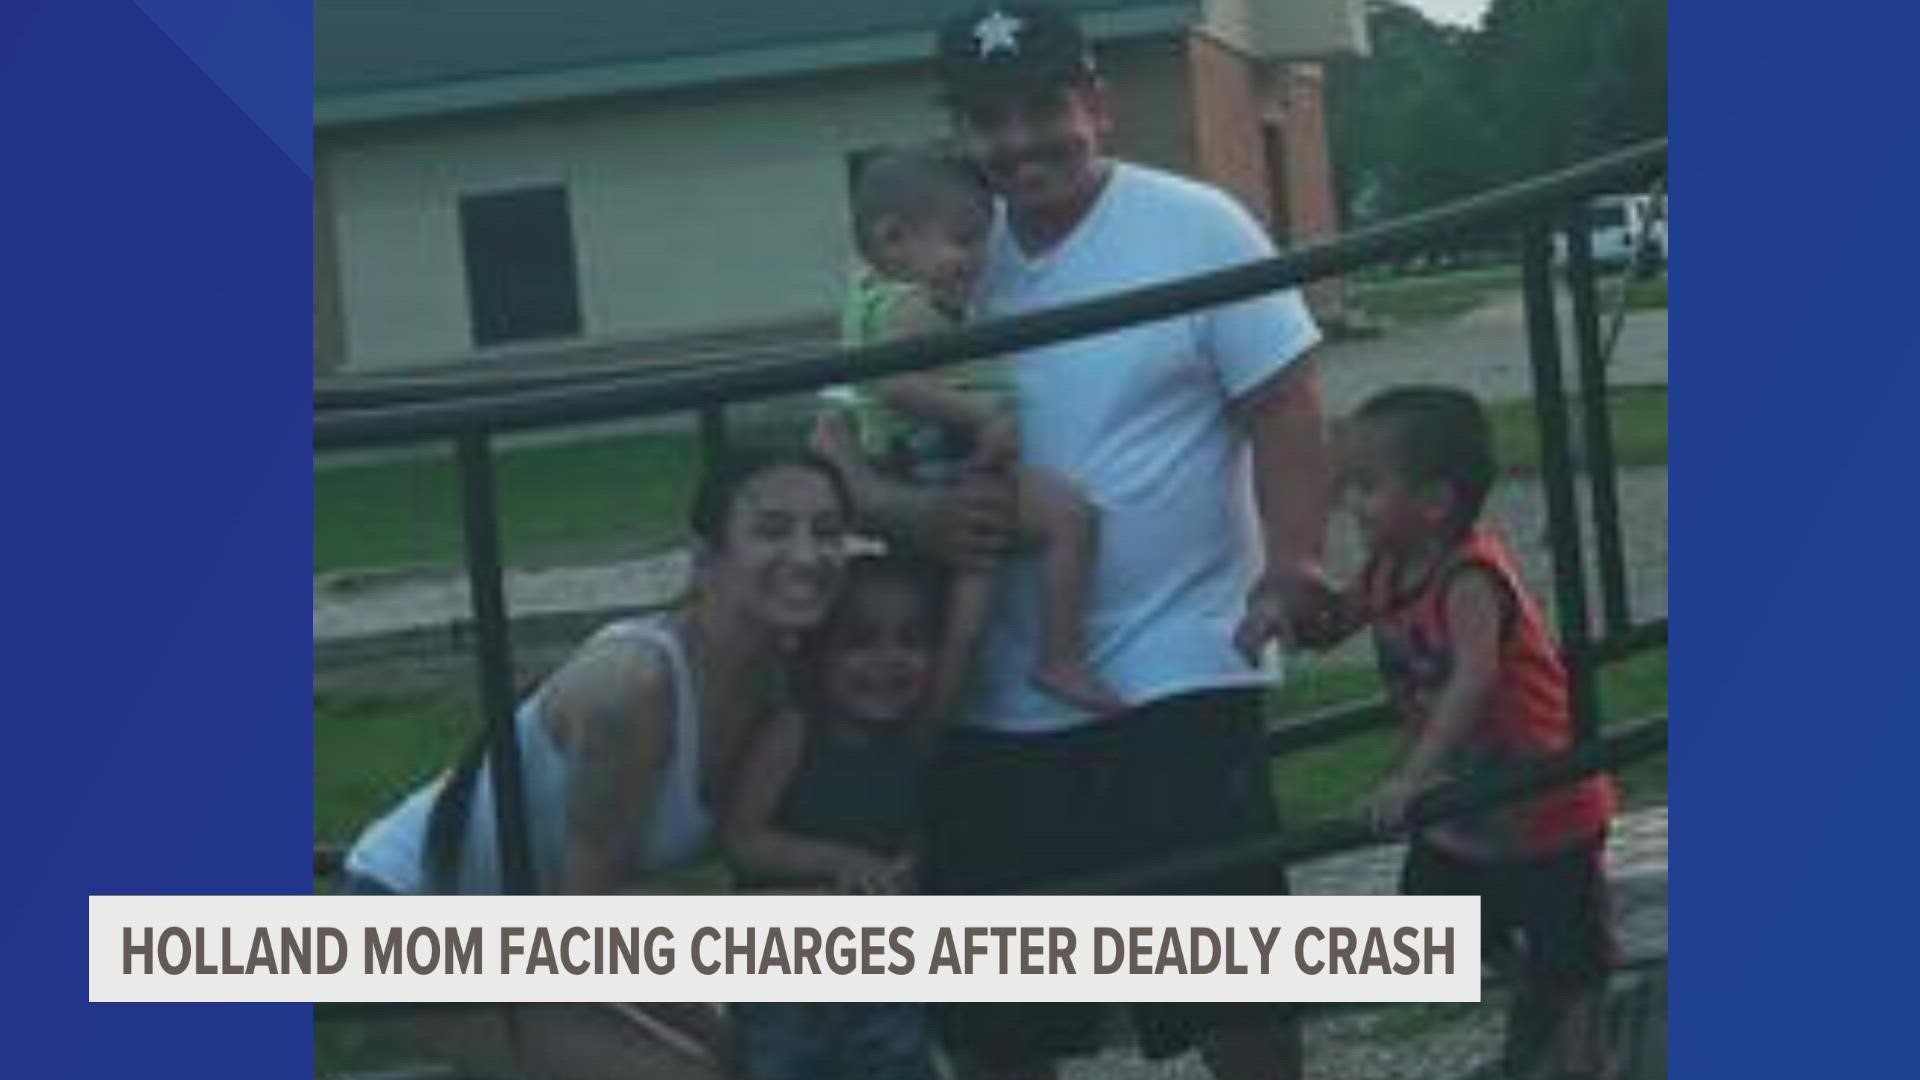 The young boys' mother is facing three counts of operating while intoxicated causing death.